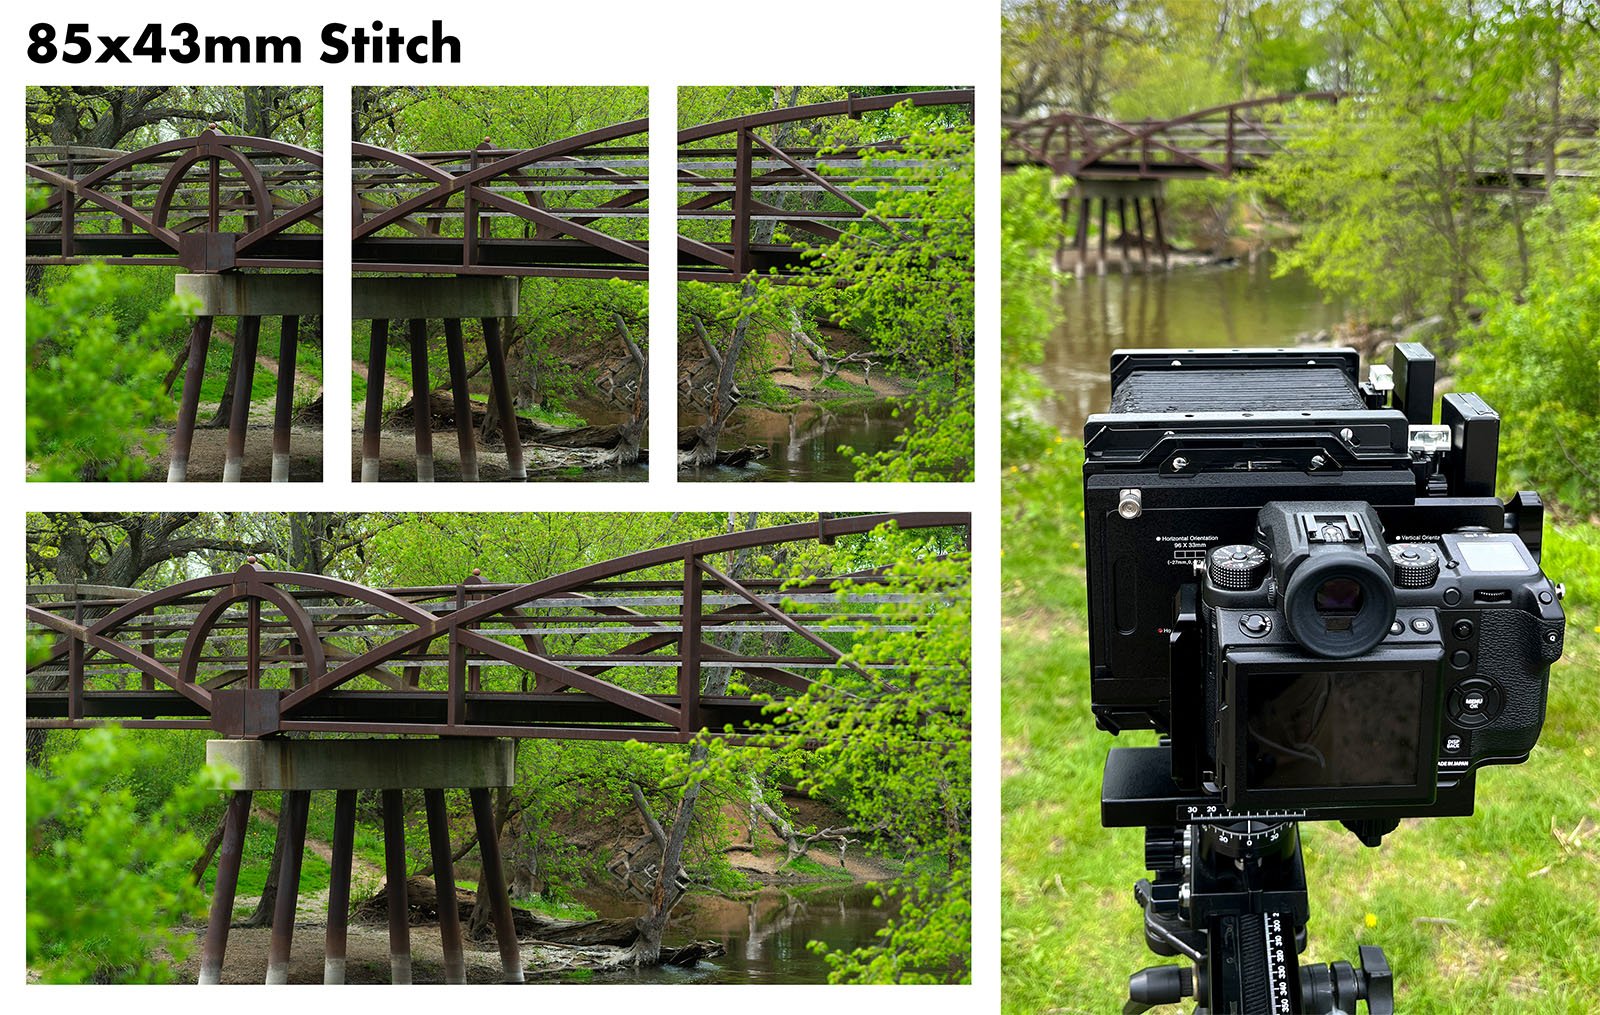 A montage of images featuring a wooden bridge in a serene, green park setting, captured through different angles with a large format camera displayed in the foreground.